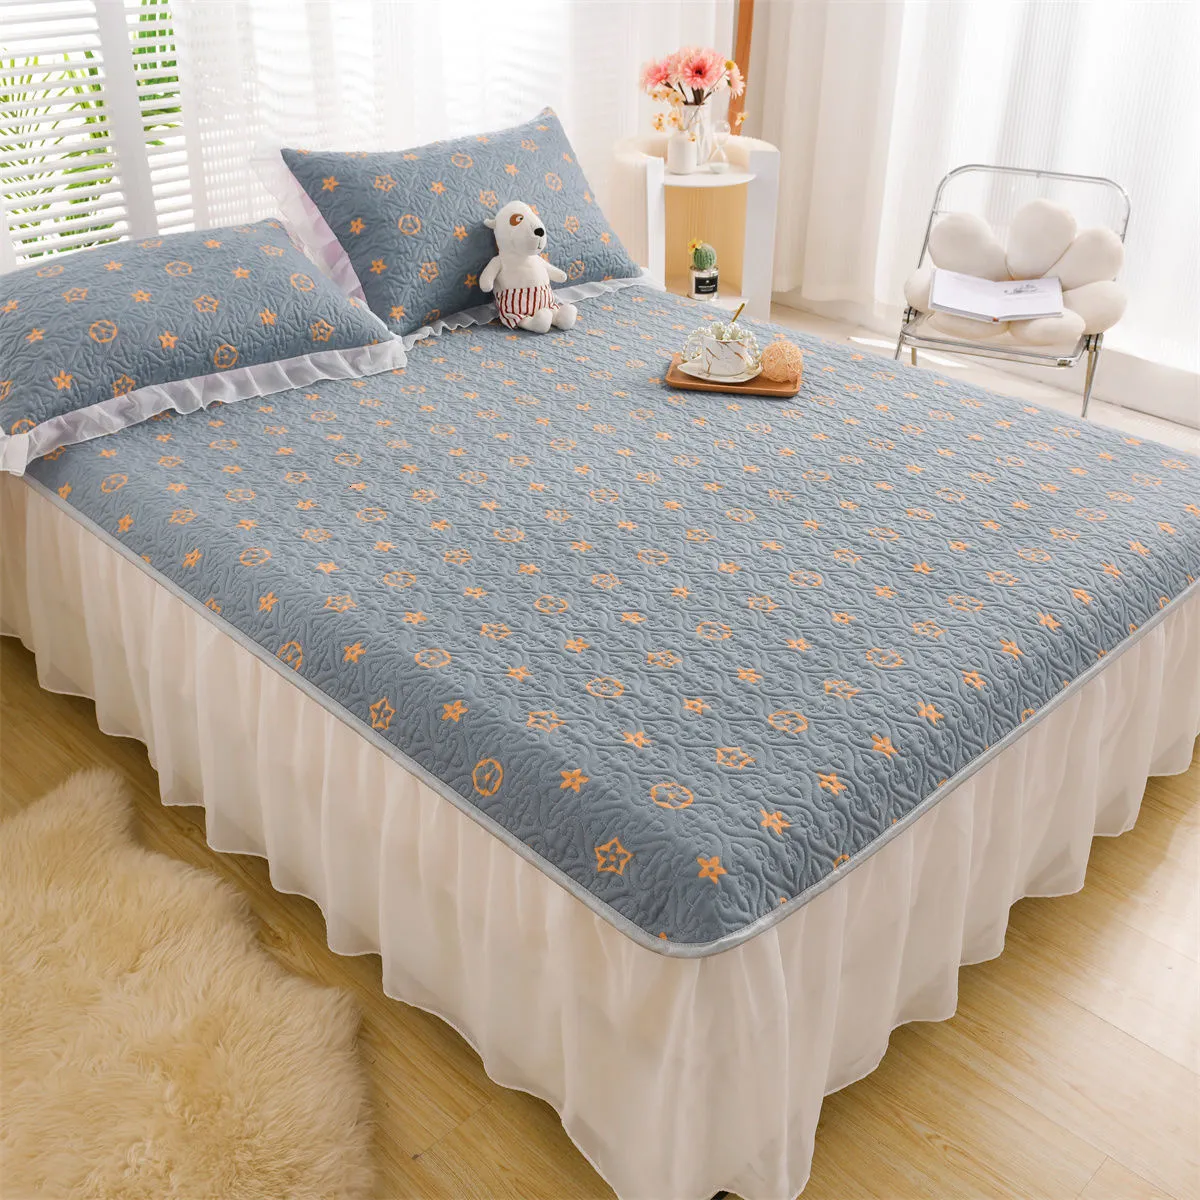 Bed Skirt Korean Bed Skirt Thickened Add Cotton Bedspread Fitted Pillowcase Four Seasons Princess Style Home Decor Mattress Protector 230314